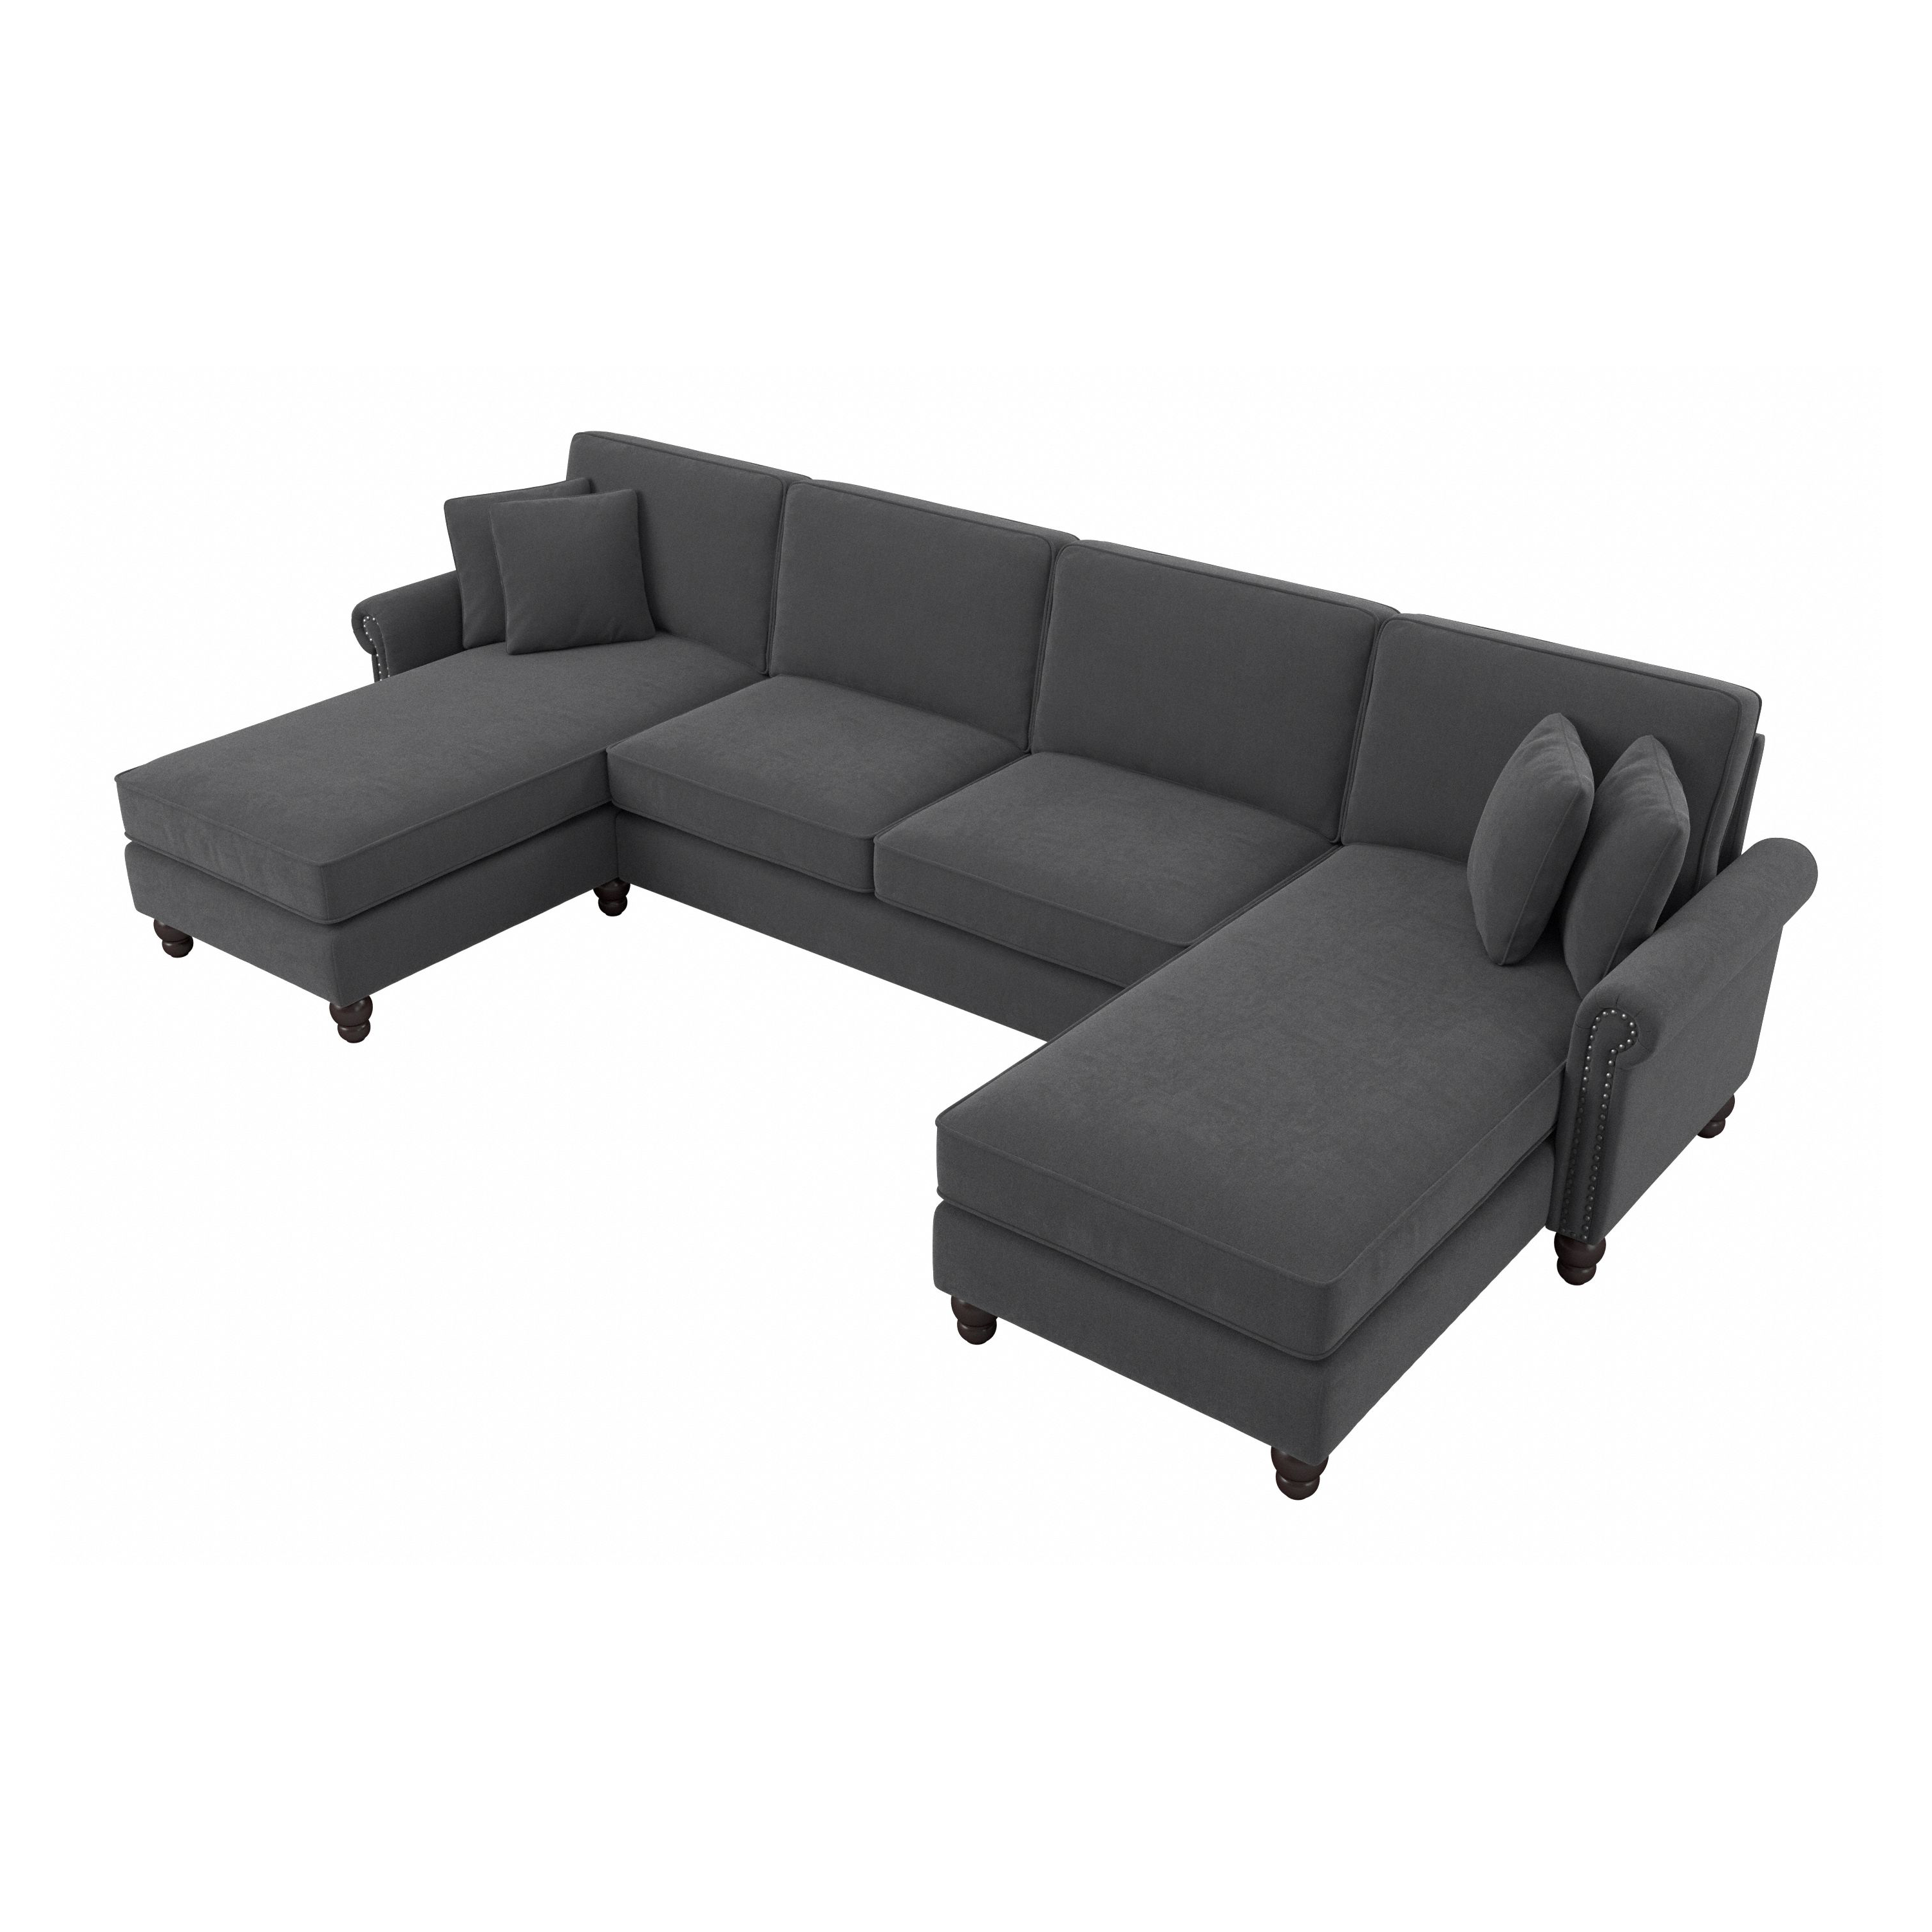 Shop Bush Furniture Coventry 131W Sectional Couch with Double Chaise Lounge 02 CVY130BCGH-03K #color_charcoal gray herringbone fabr